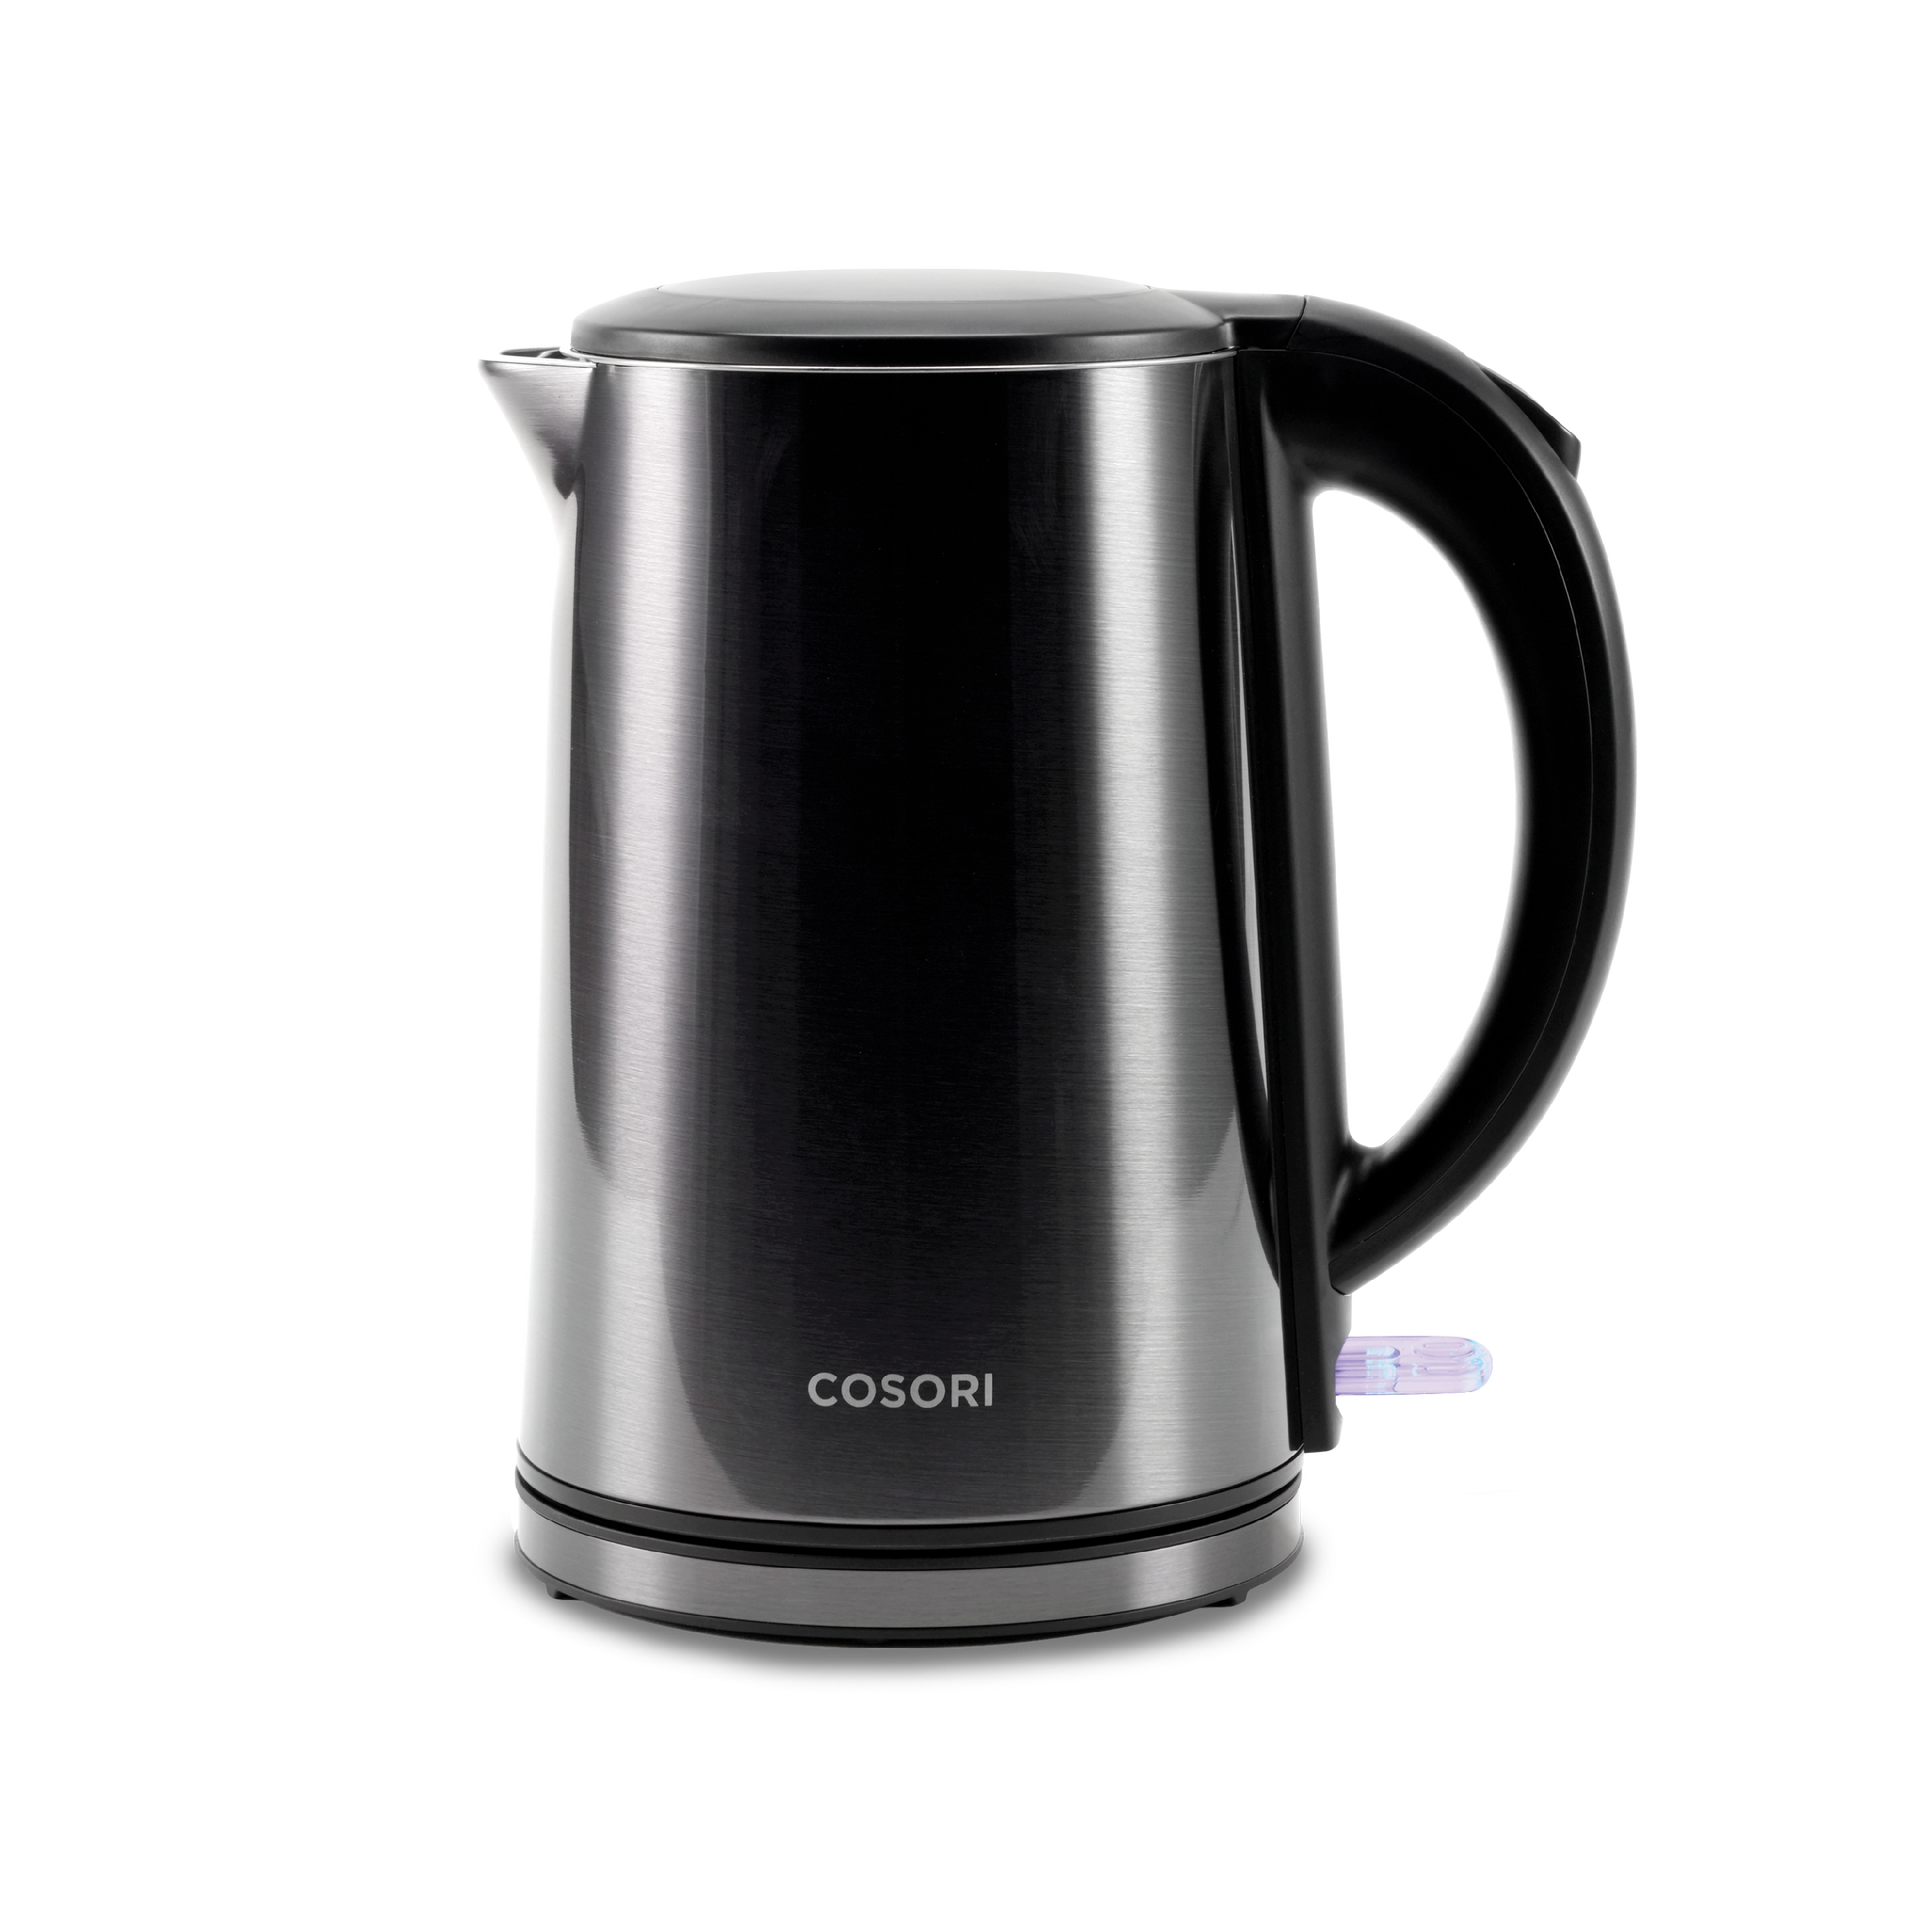 COSORI Electric Kettle Stainless Steel With Double Wall, 1.5L Wide-Open Lid  Electric Tea Kettle, Black & Electric Kettle 1.7L, 1500W Wide Opening